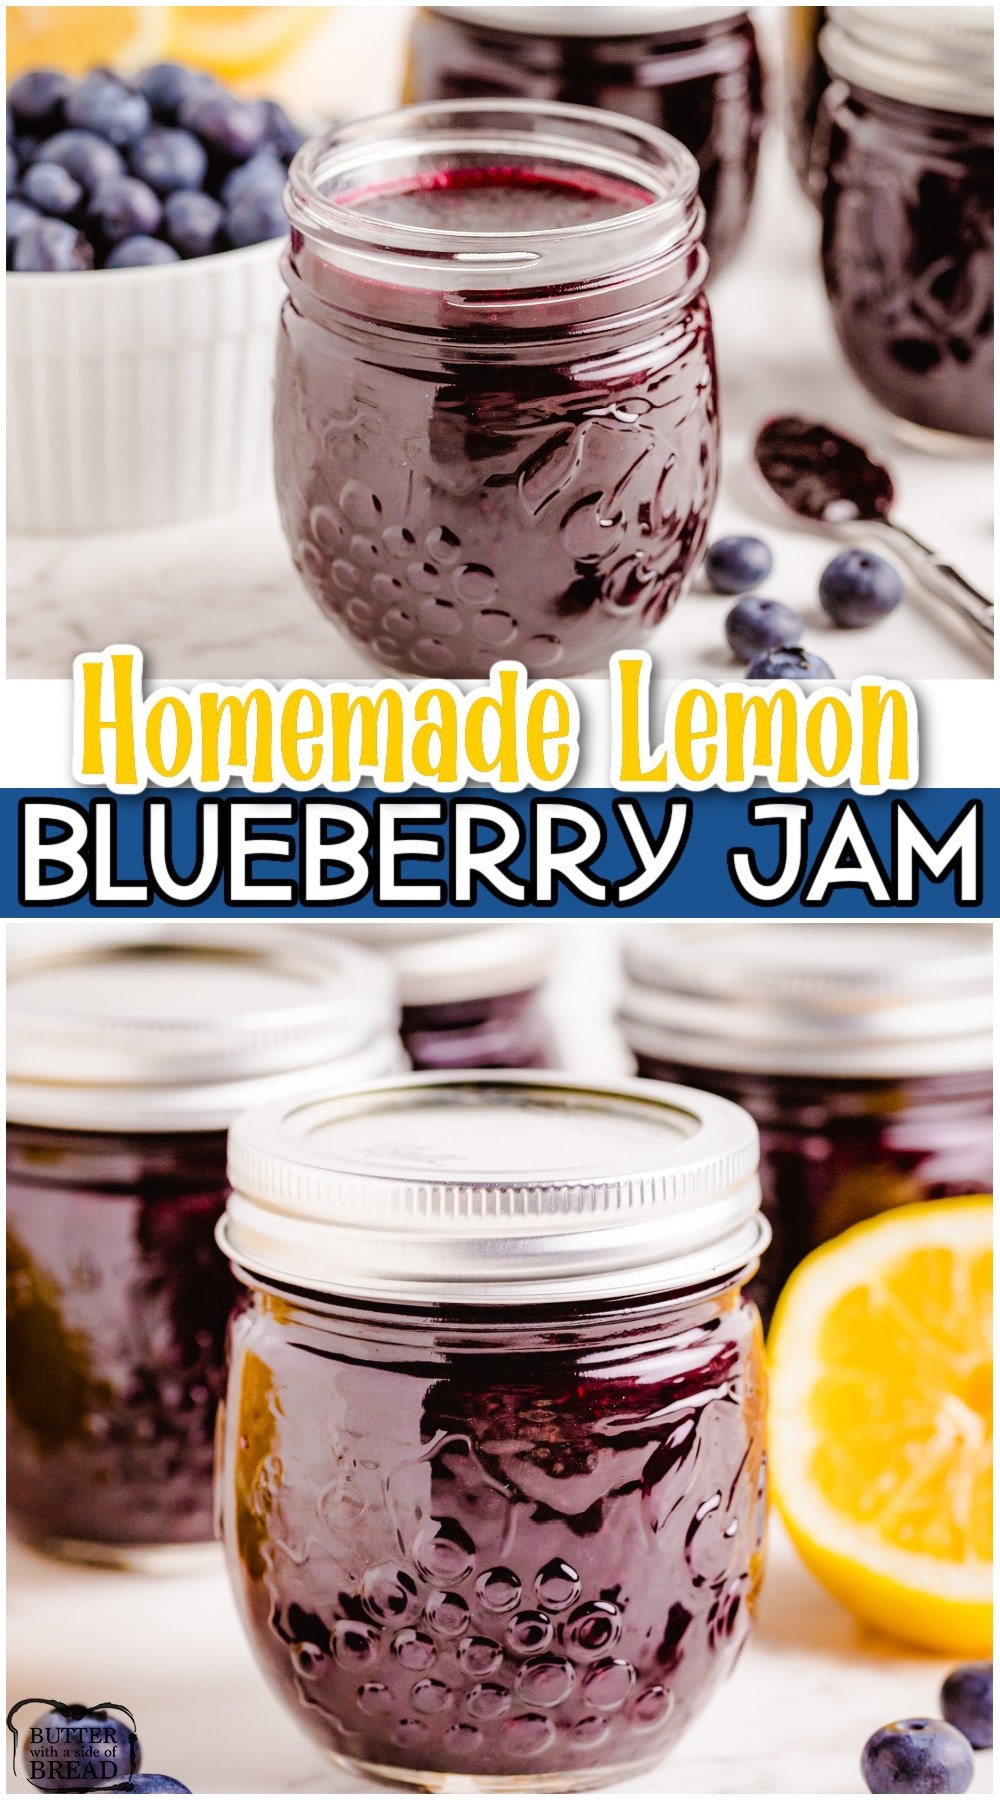 Lemon Blueberry Jam made easy with blueberries, juice, sugar, pectin and a lemon. Delightfully bright, sweet homemade jam that's the perfect addition to your morning toast and biscuits.